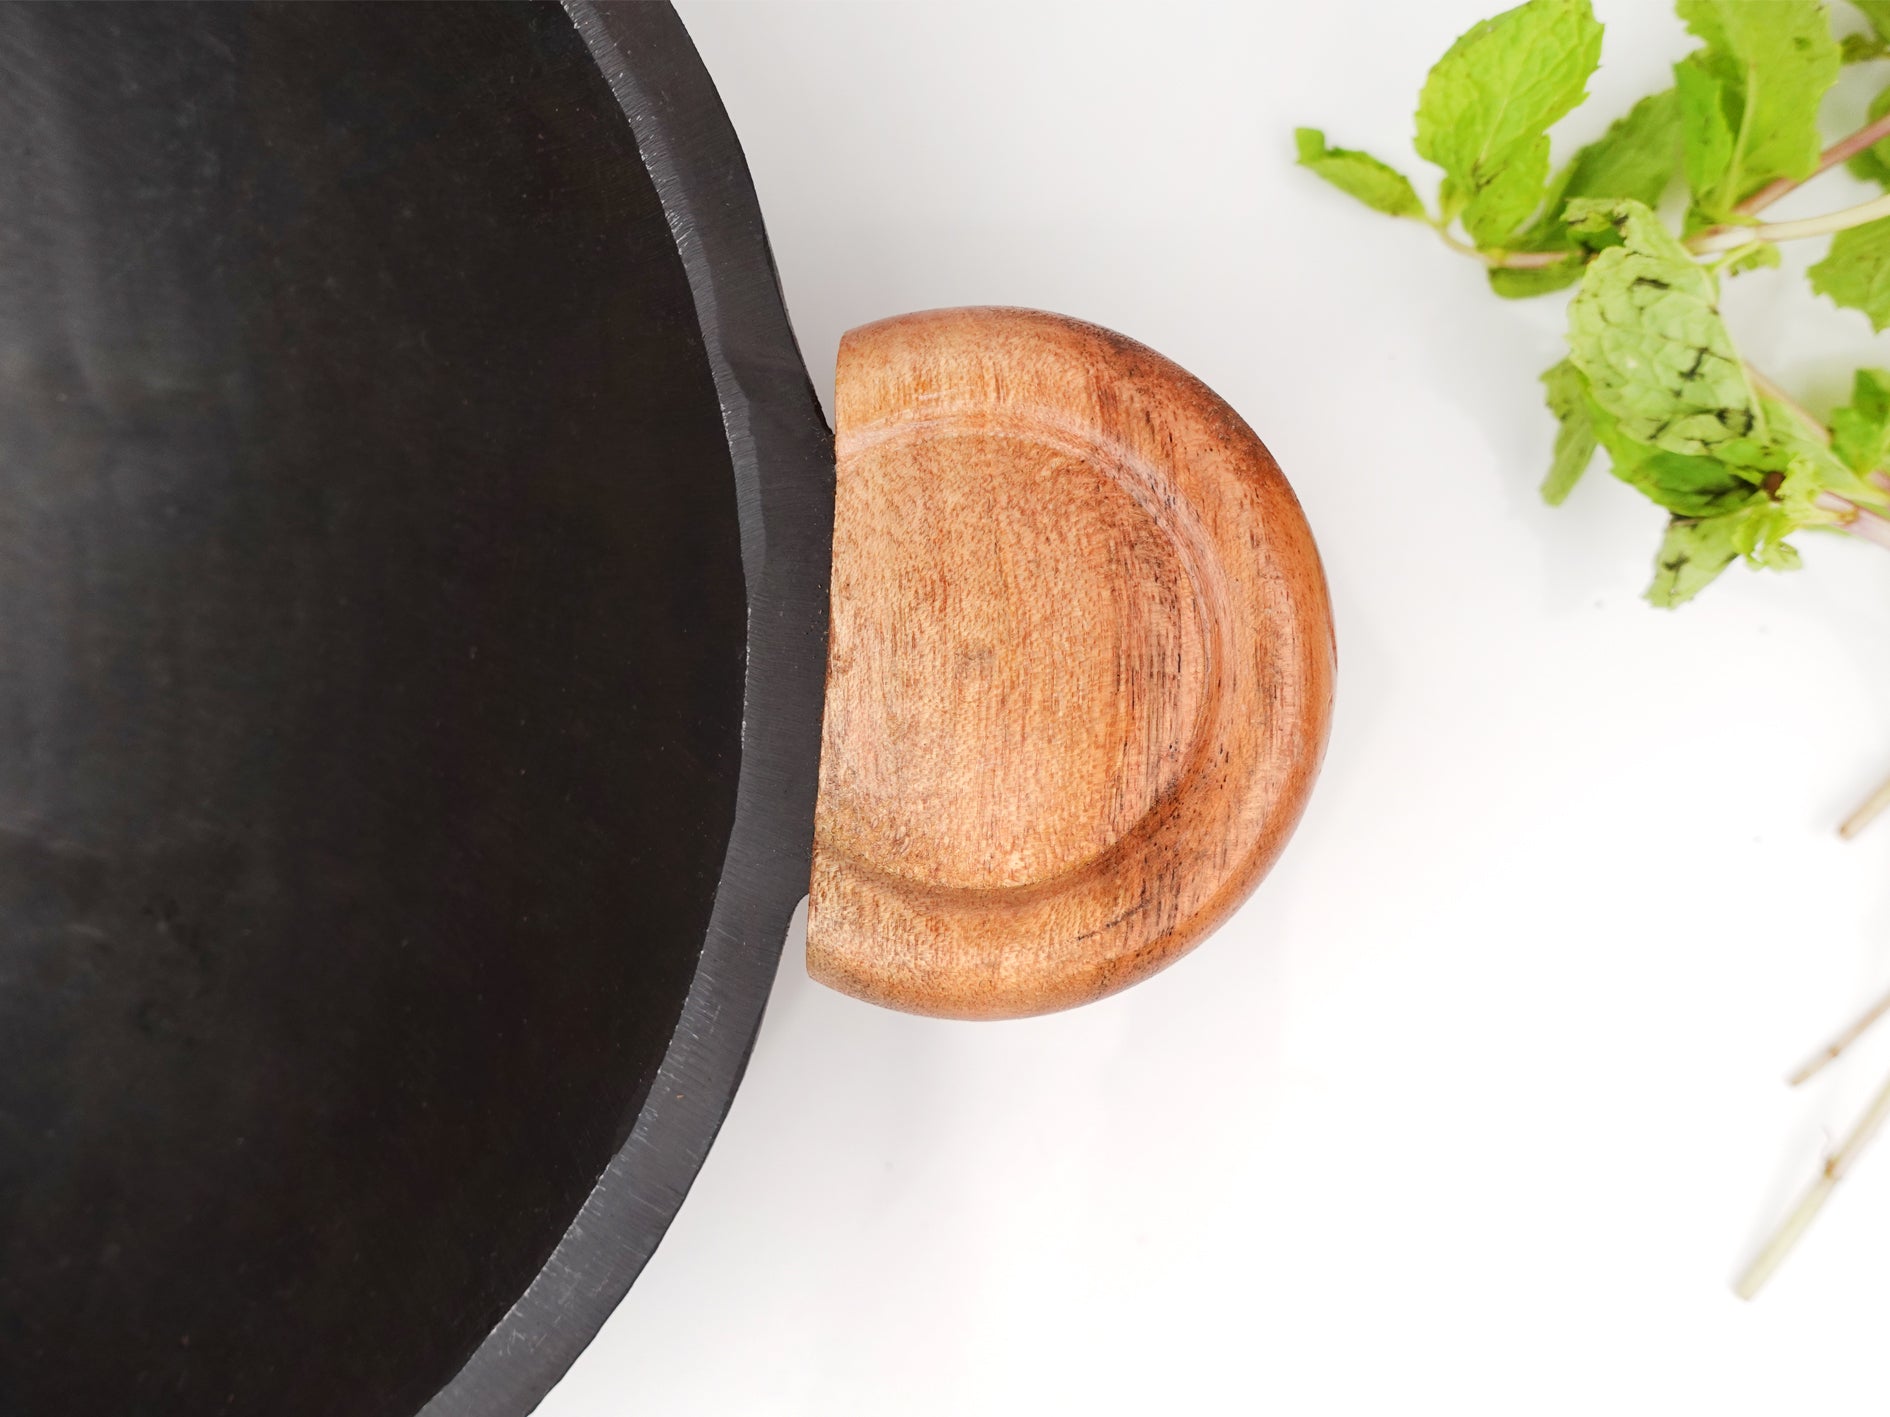 Appam Pan - Cast Iron - Wooden Handle - Special Grinded and Seasoned . –  Rosh Cookwares.